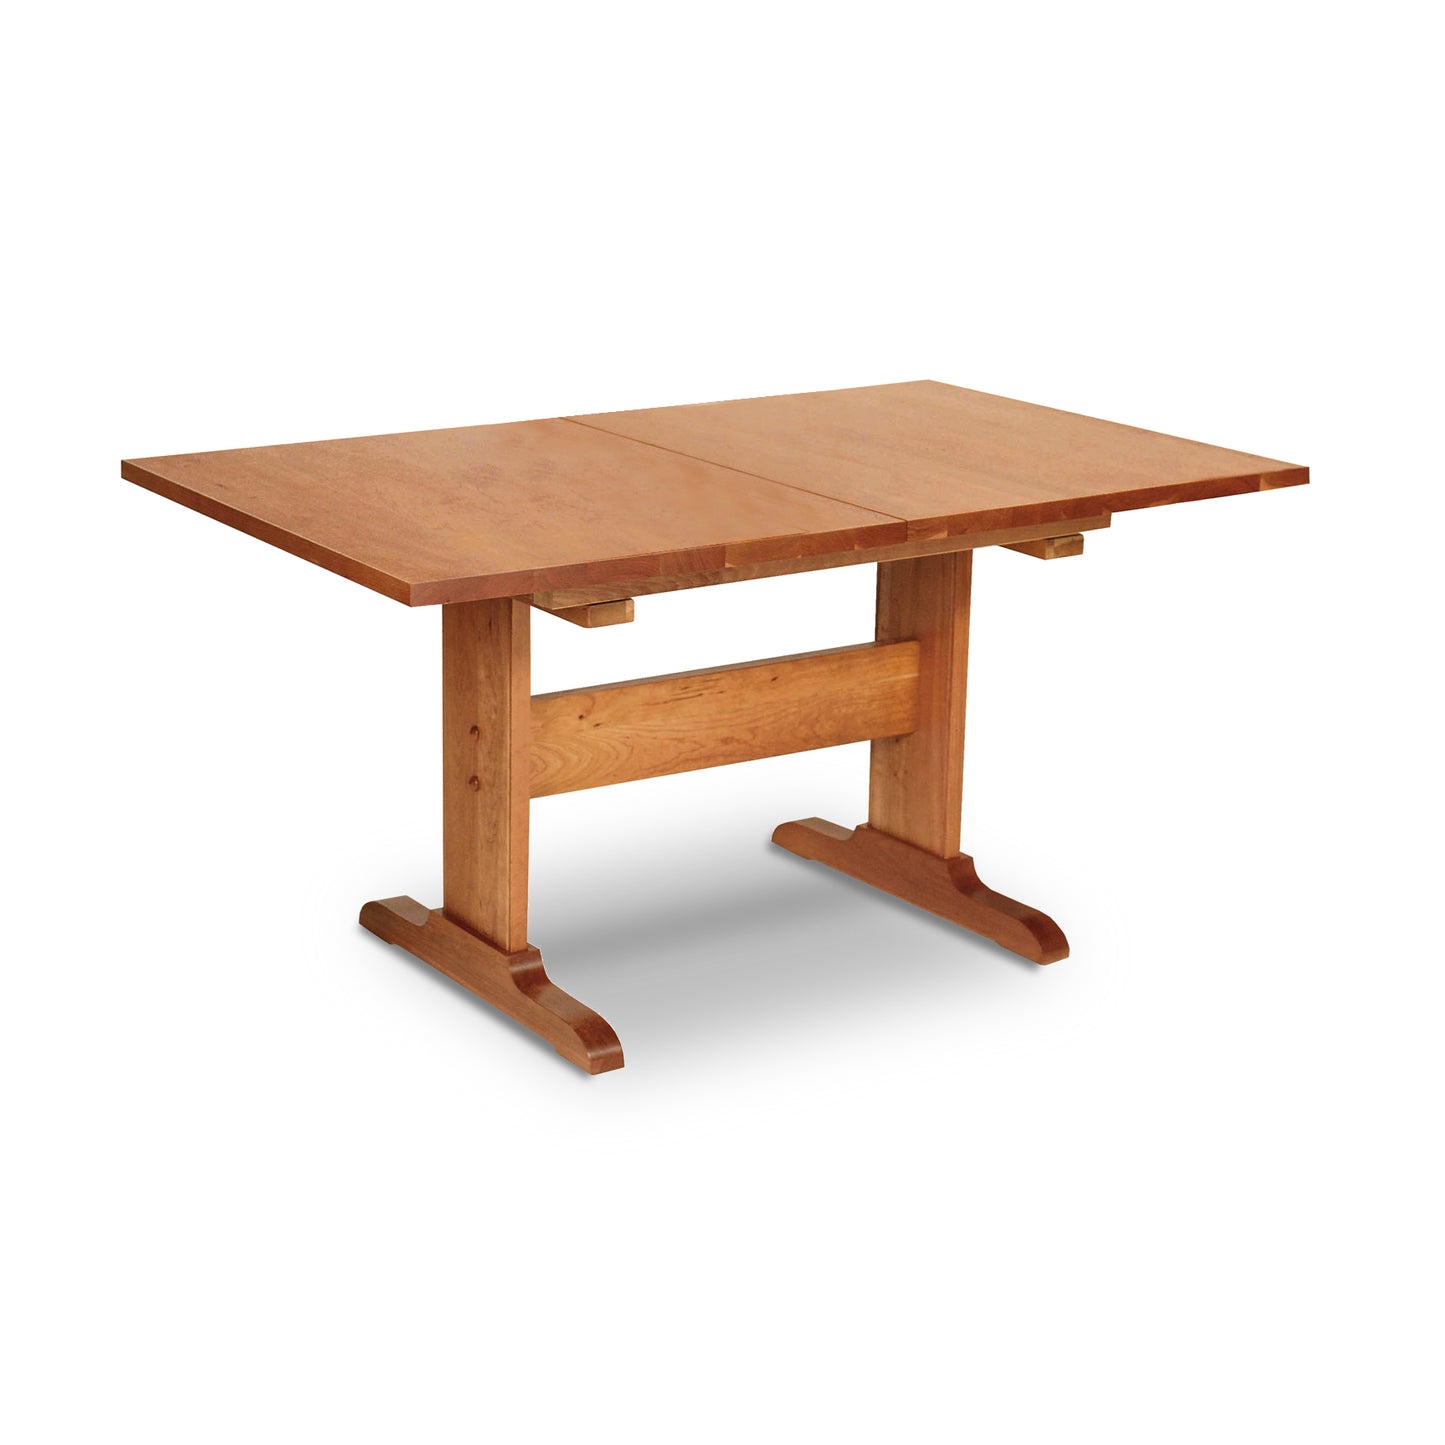 An eco-friendly Rectangular Trestle Extension Table from Lyndon Furniture with a sustainably harvested wood top and two legs.